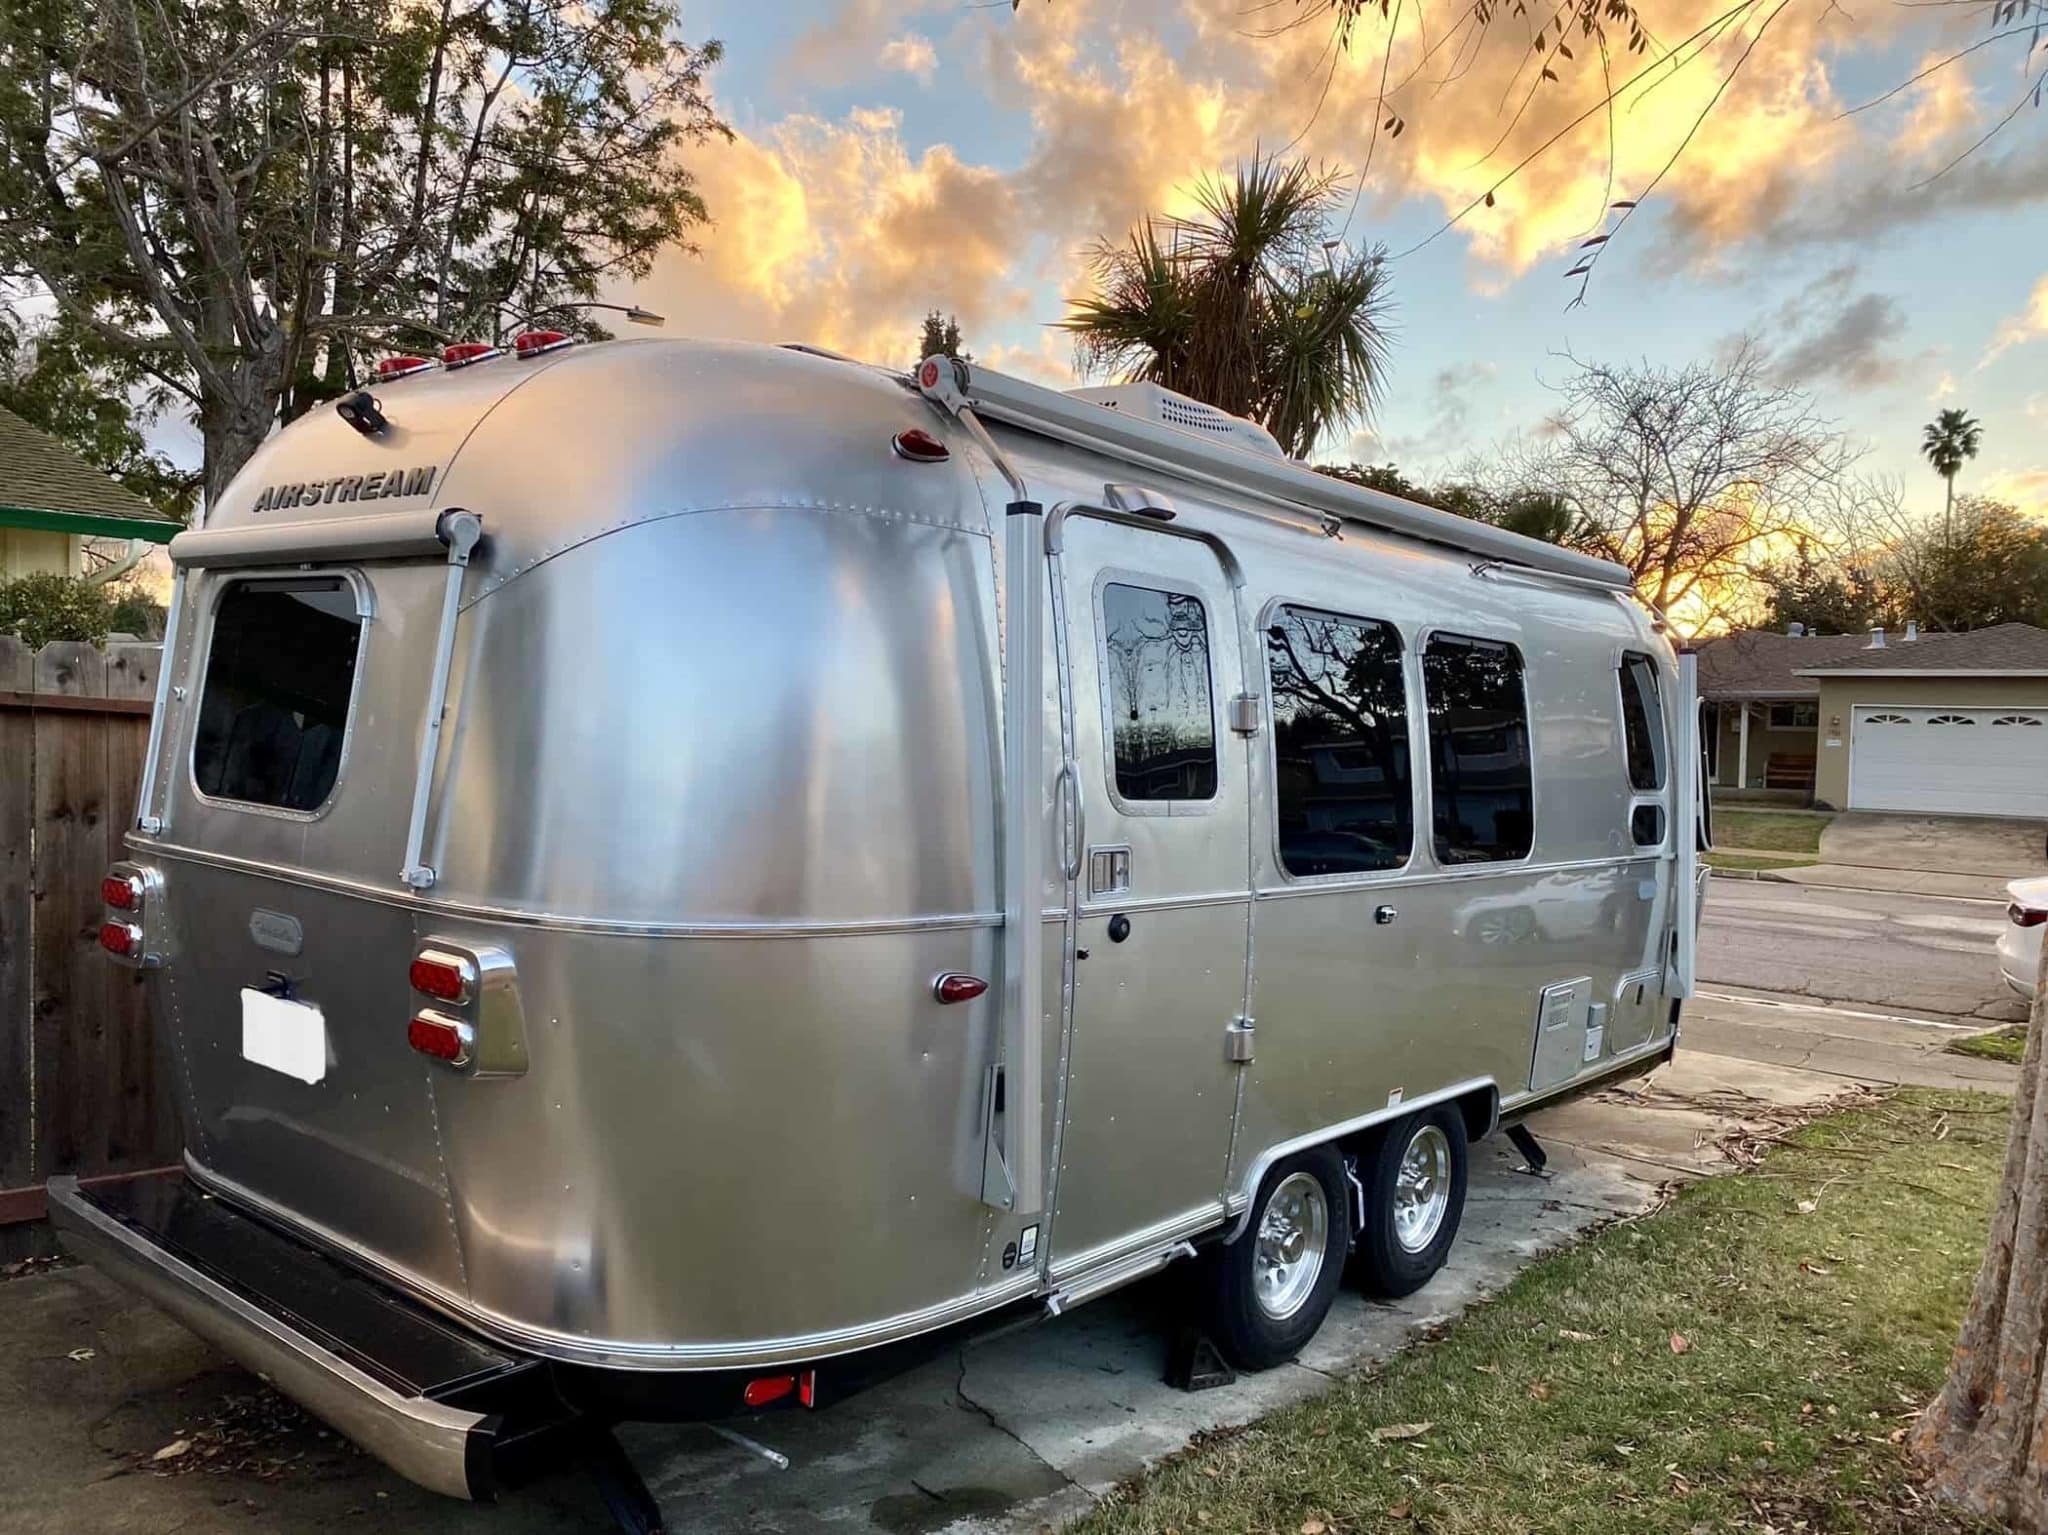 2020 Airstream 23FT Globe Trotter For Sale in San Jose - Airstream Used Airstream Globetrotter 23 Twin For Sale